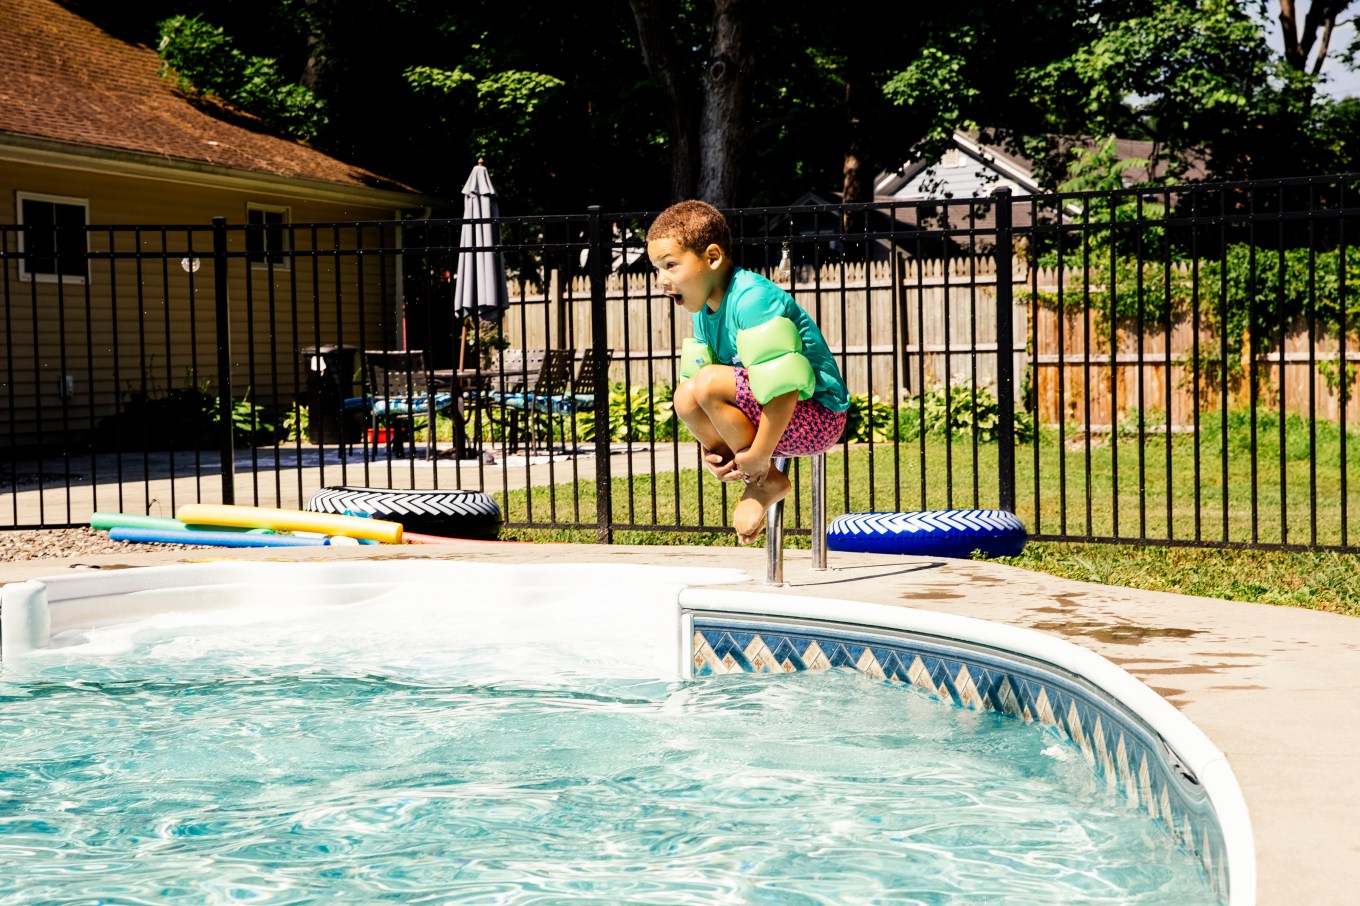 A boy jumping into a swimming pool with a bar style fence.